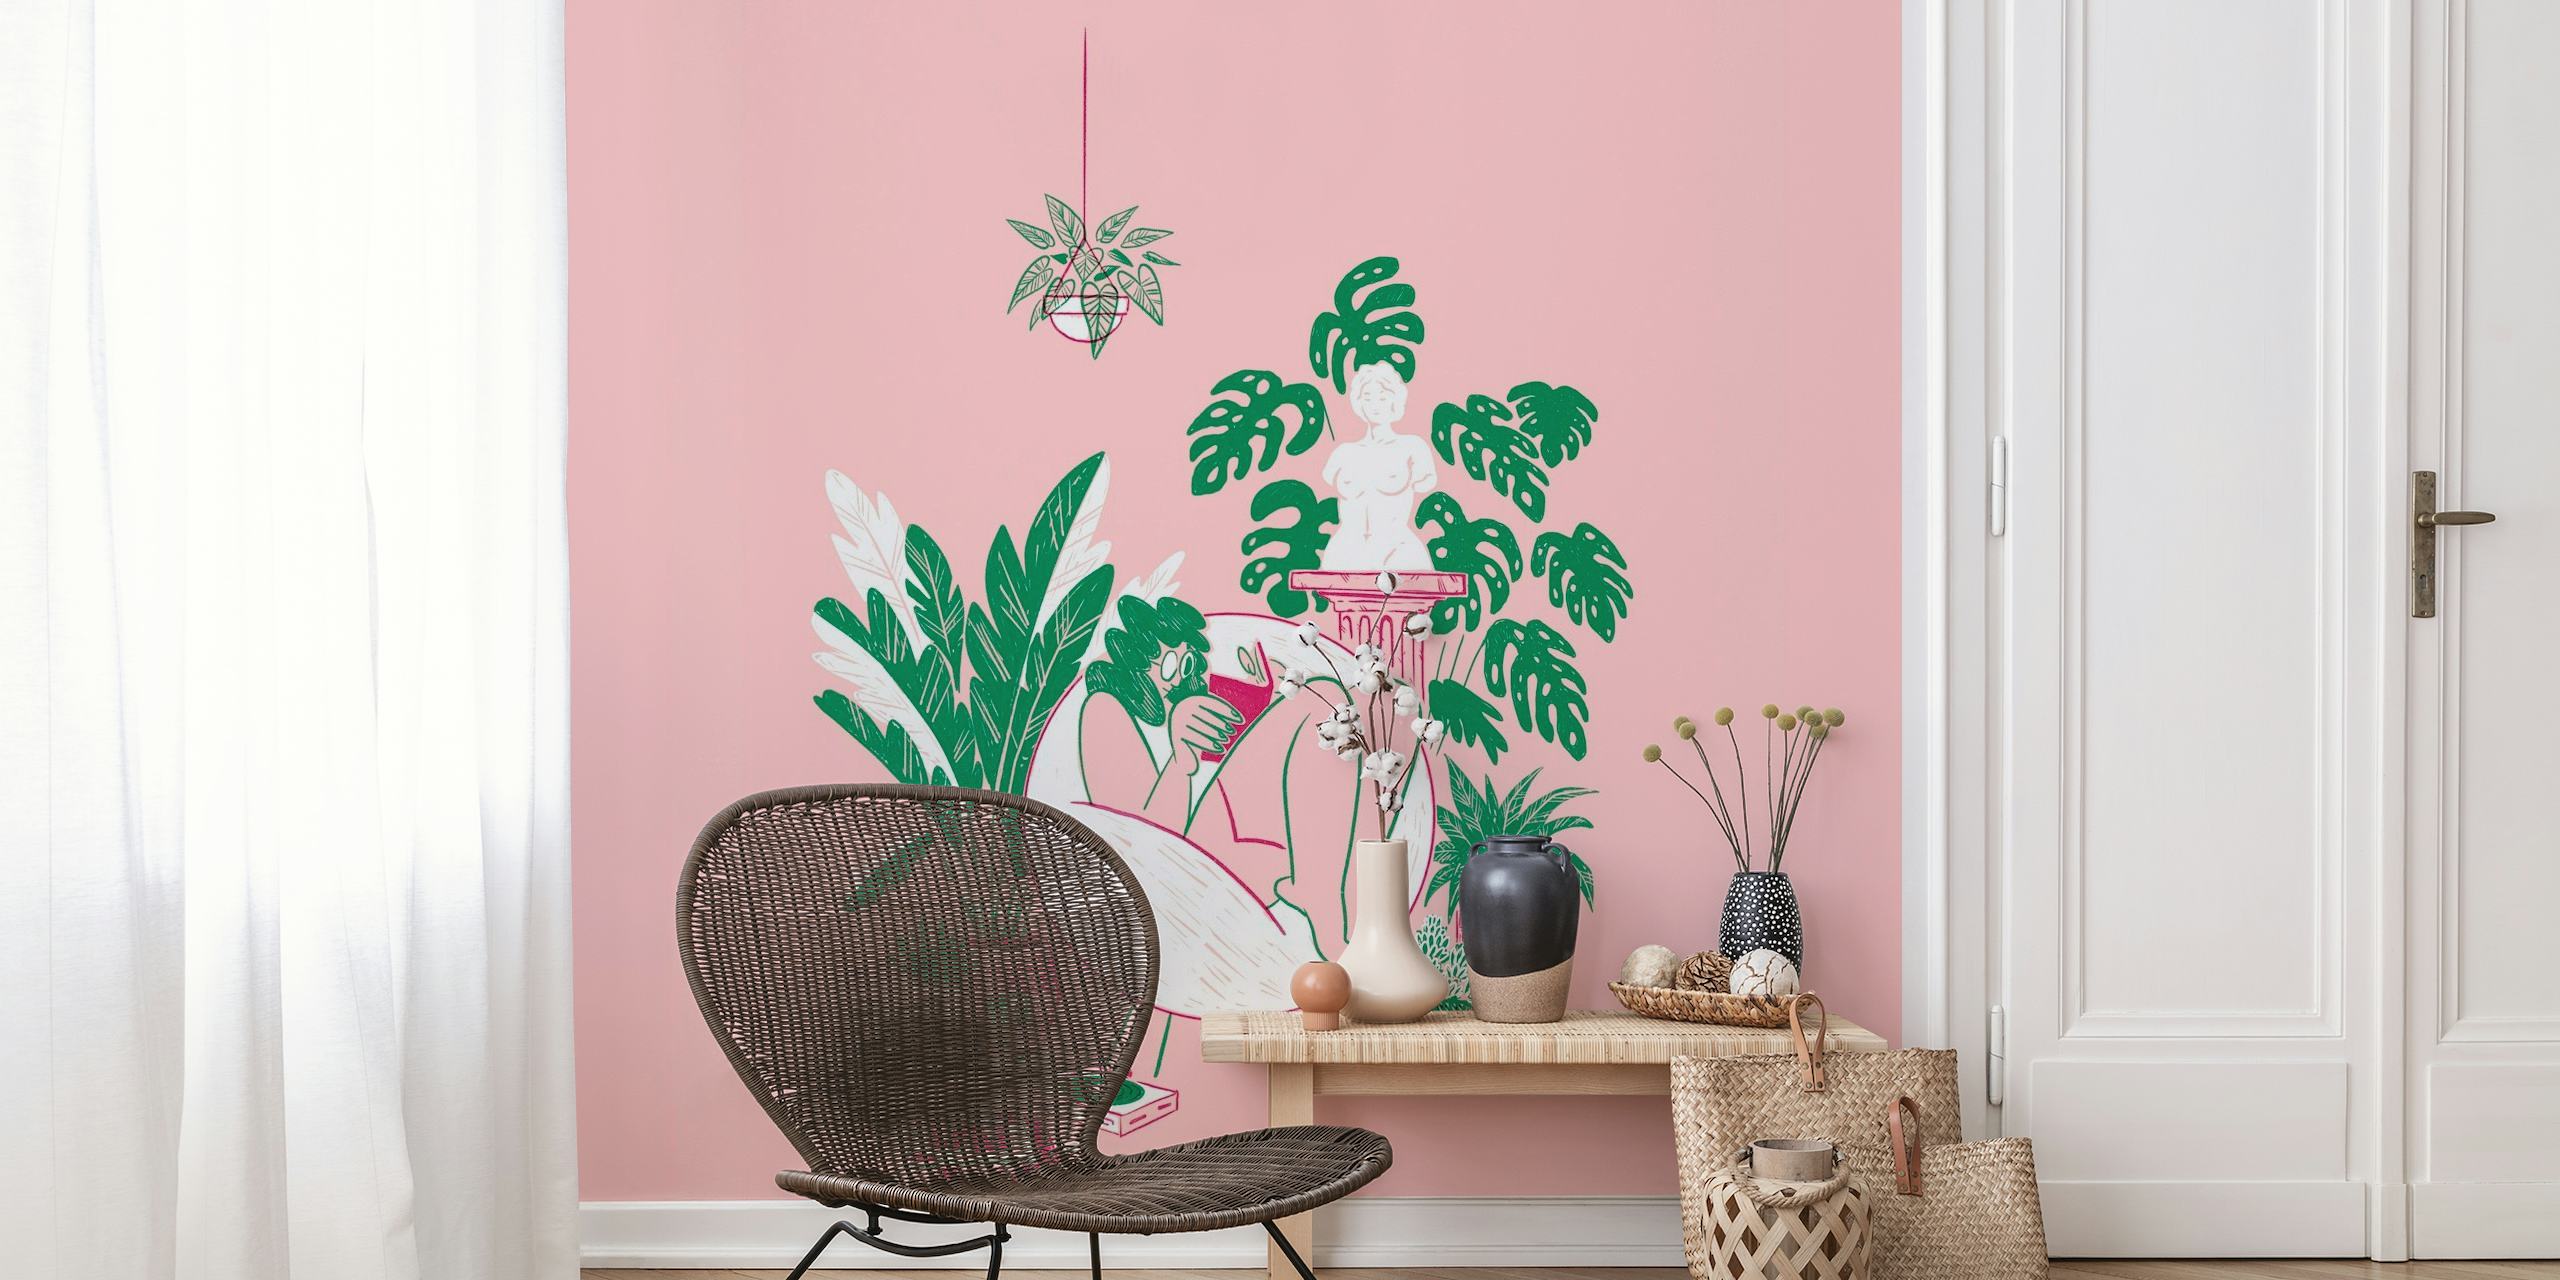 Illustration of person surrounded by potted plants on pink background, capturing a tranquil indoor garden scene.